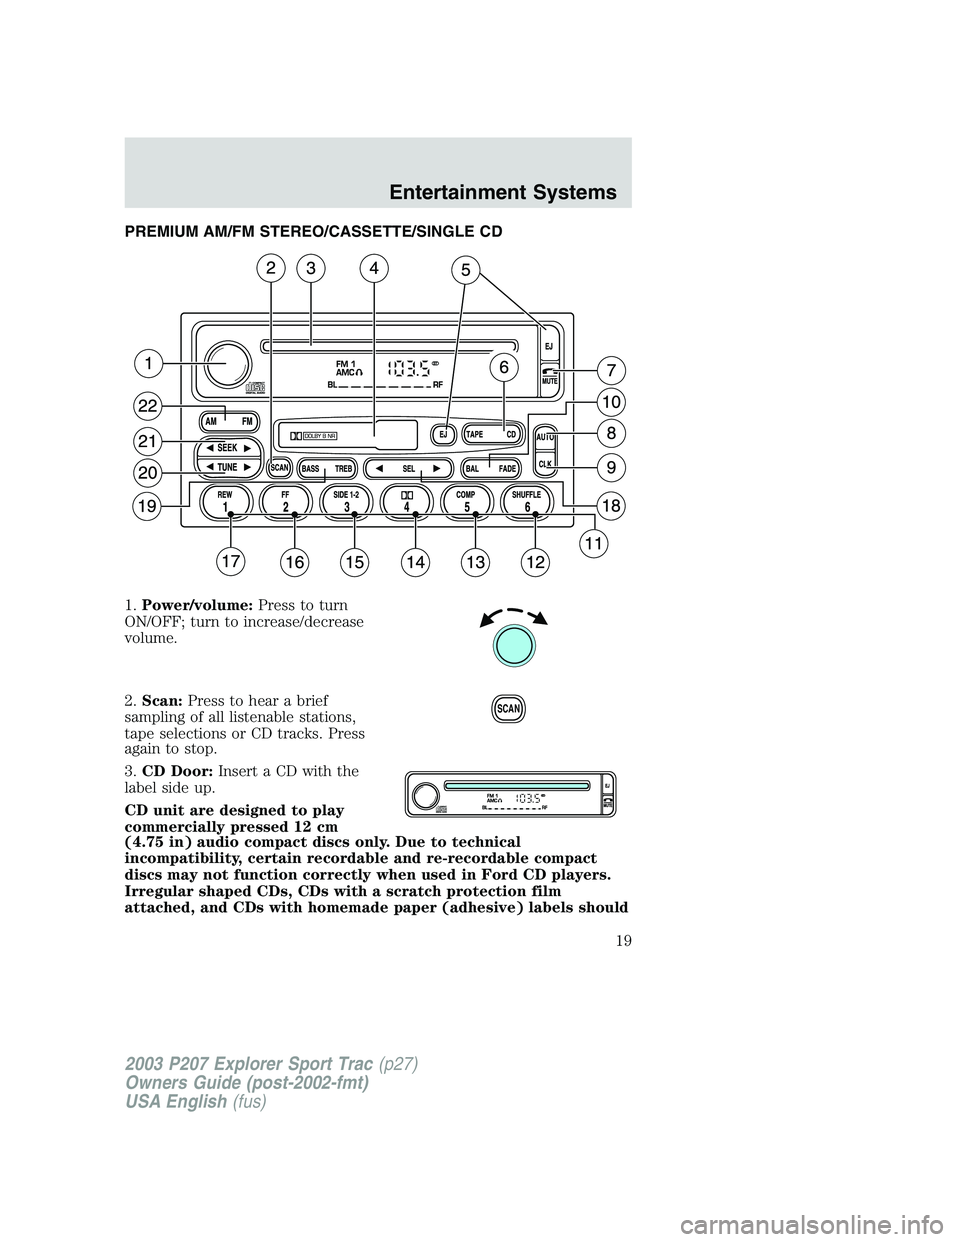 FORD EXPLORER SPORT TRAC 2003  Owners Manual PREMIUM AM/FM STEREO/CASSETTE/SINGLE CD
1.Power/volume:Press to turn
ON/OFF; turn to increase/decrease
volume.
2.Scan:Press to hear a brief
sampling of all listenable stations,
tape selections or CD t